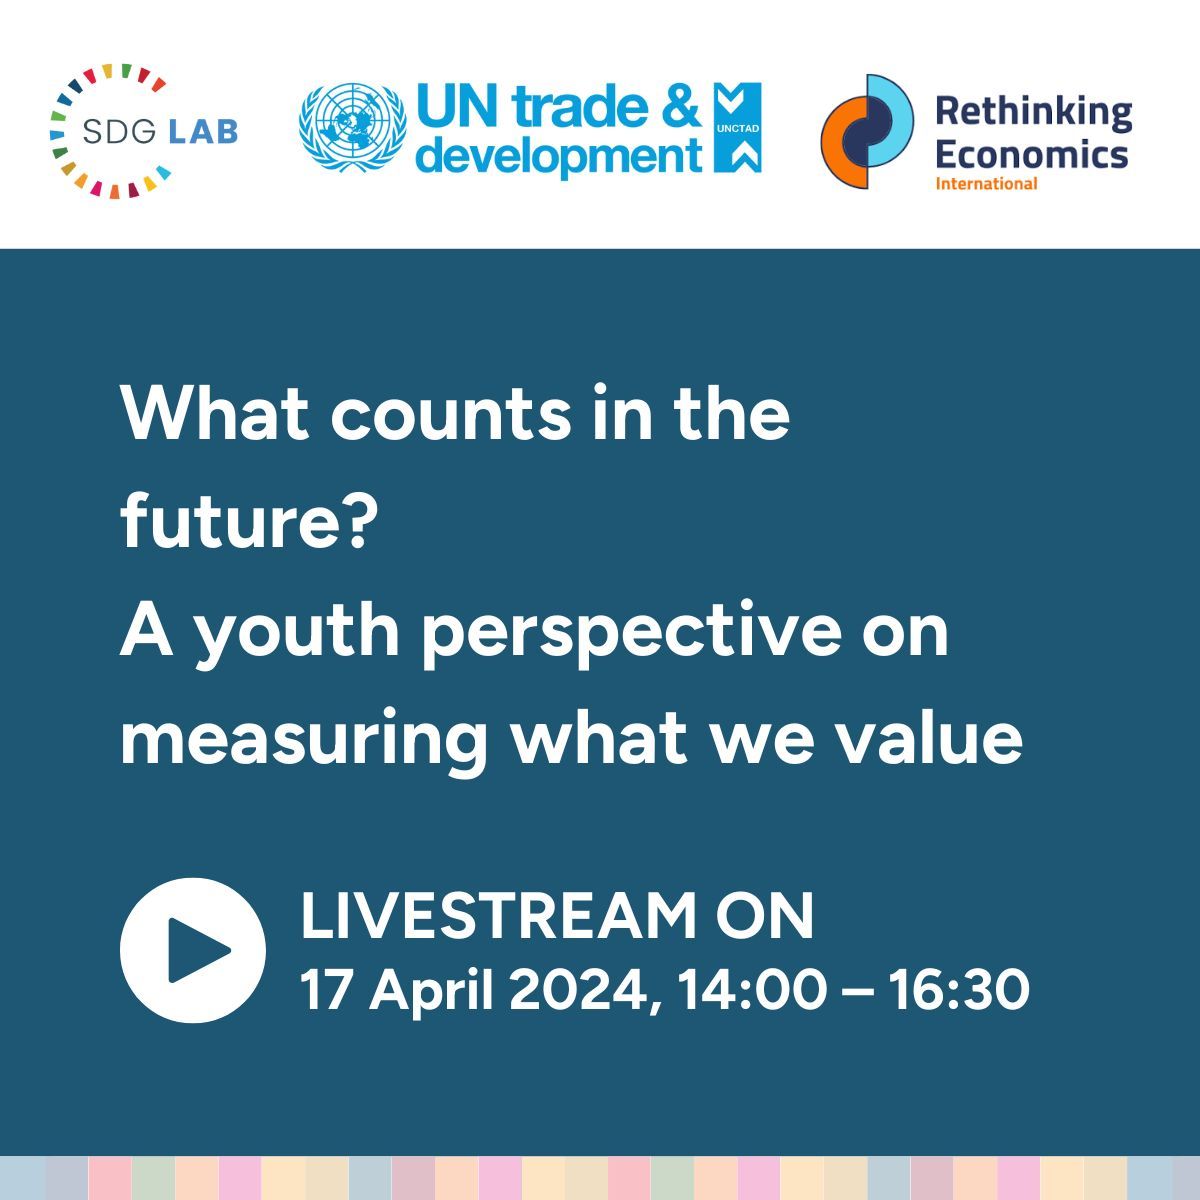 Starting soon - 2 pm CET: @SDGLab’s What’s Next with @UNCTAD & @rethinkecon on Moving Beyond GDP, featuring 5 winners of a recent youth essay contest where they shared their perspectives on the topic of valuing what counts. 📺 buff.ly/443J1T5 #YouthMovingBeyondGDP